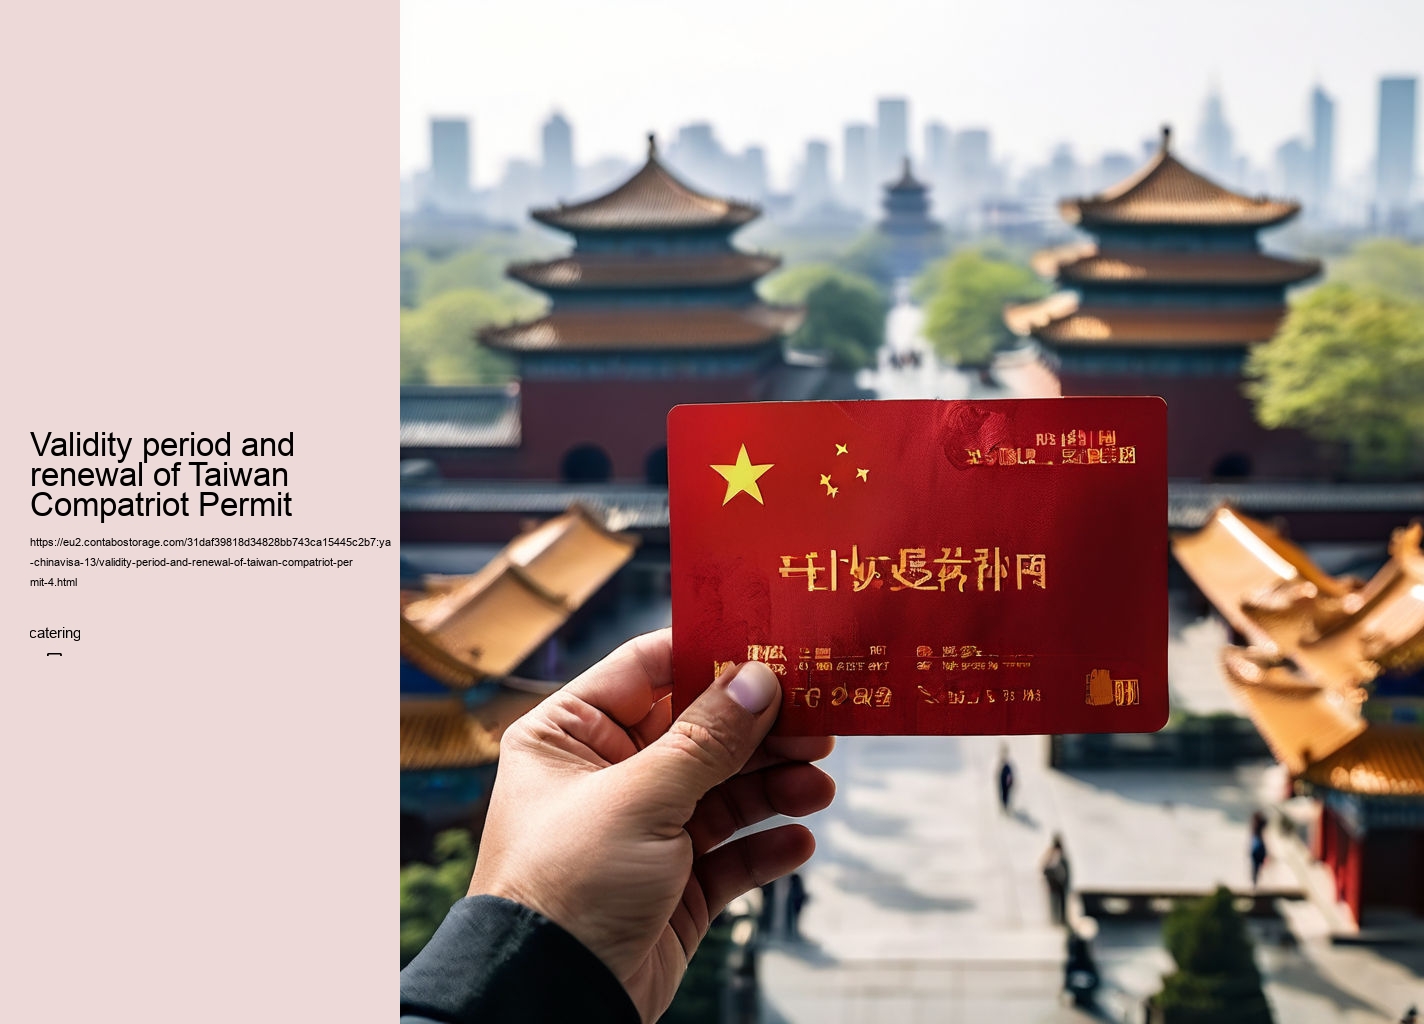 Validity period and renewal of Taiwan Compatriot Permit